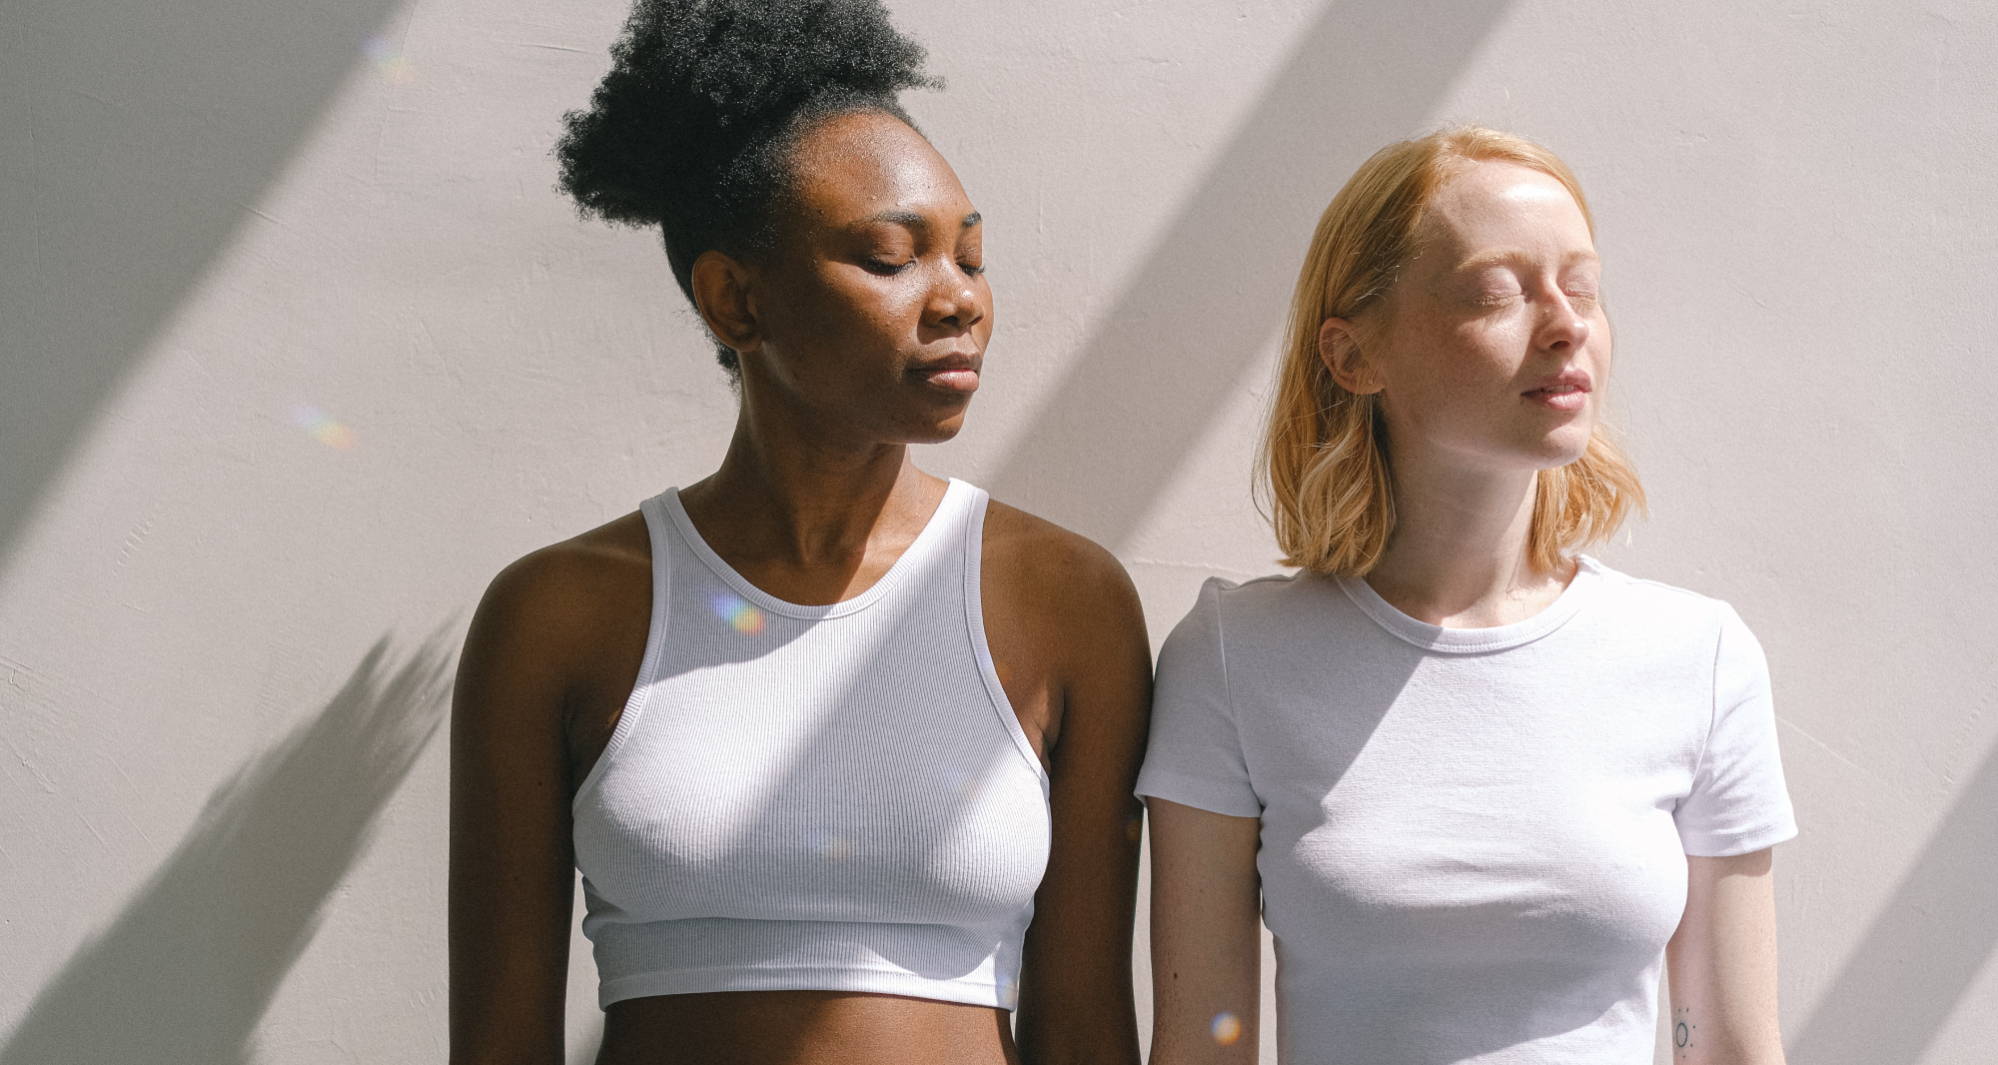  Two women standing in the sunshine with their eyes closed wear tight shirts without a visible bra.